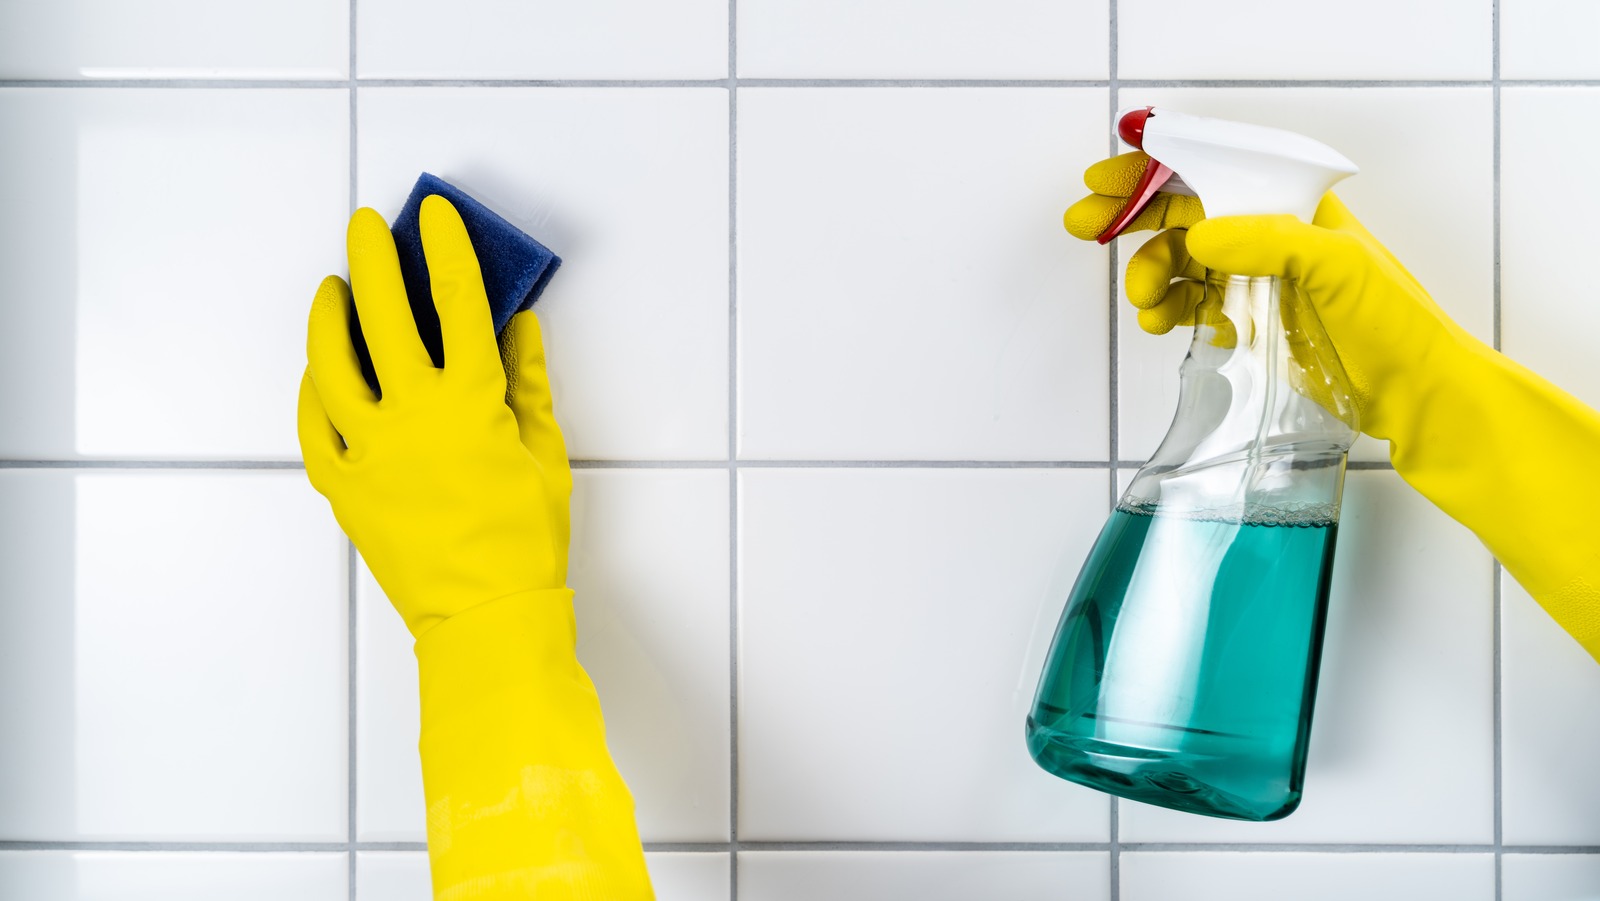 https://www.housedigest.com/img/gallery/why-you-may-want-to-avoid-a-viral-tiktok-grout-cleaning-hack/l-intro-1673449678.jpg